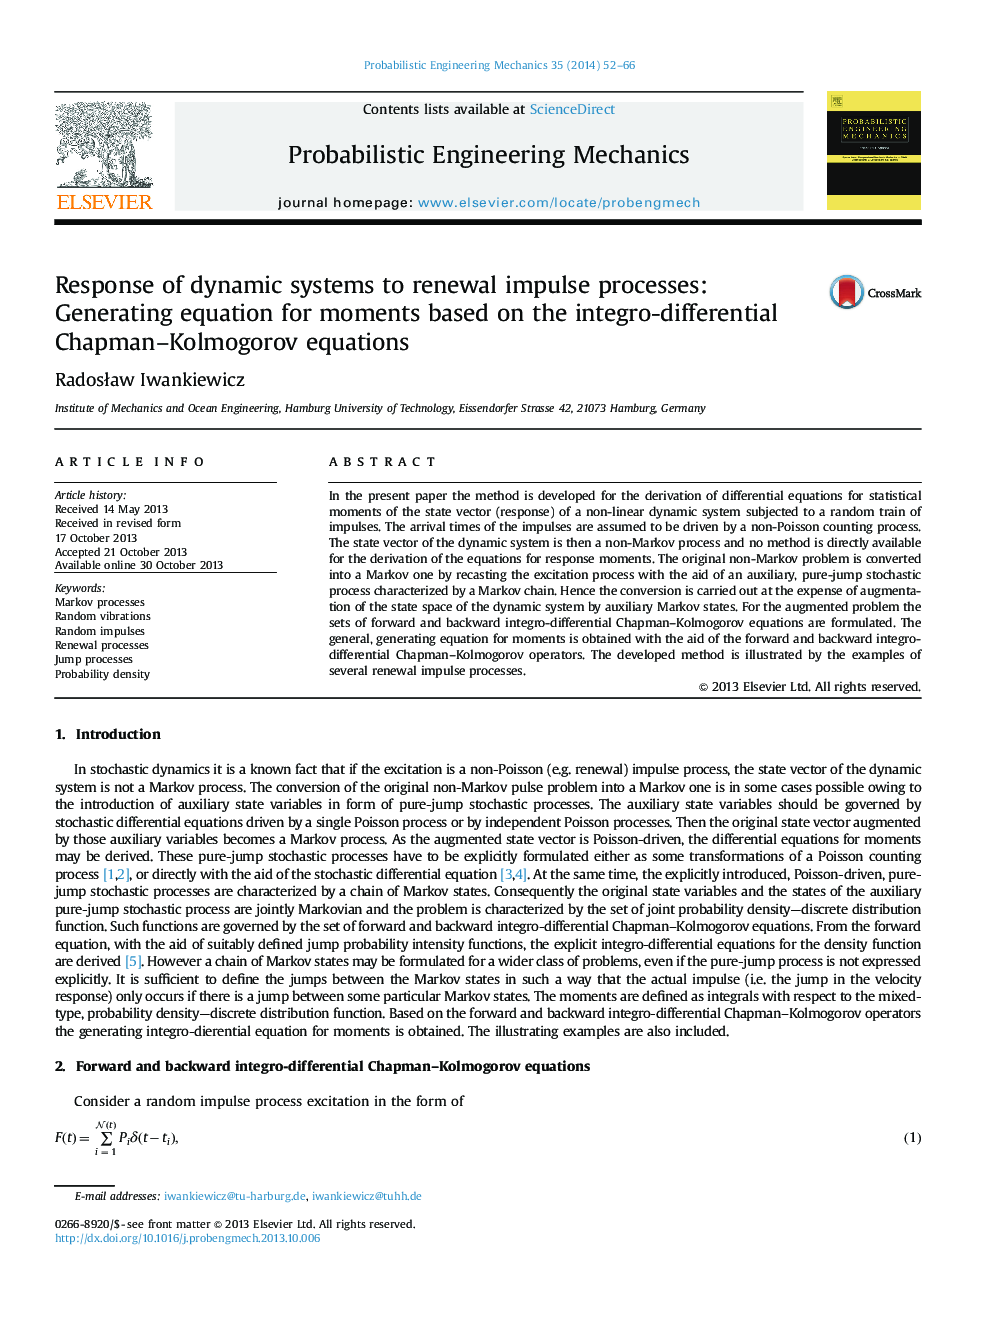 Response of dynamic systems to renewal impulse processes: Generating equation for moments based on the integro-differential Chapman–Kolmogorov equations